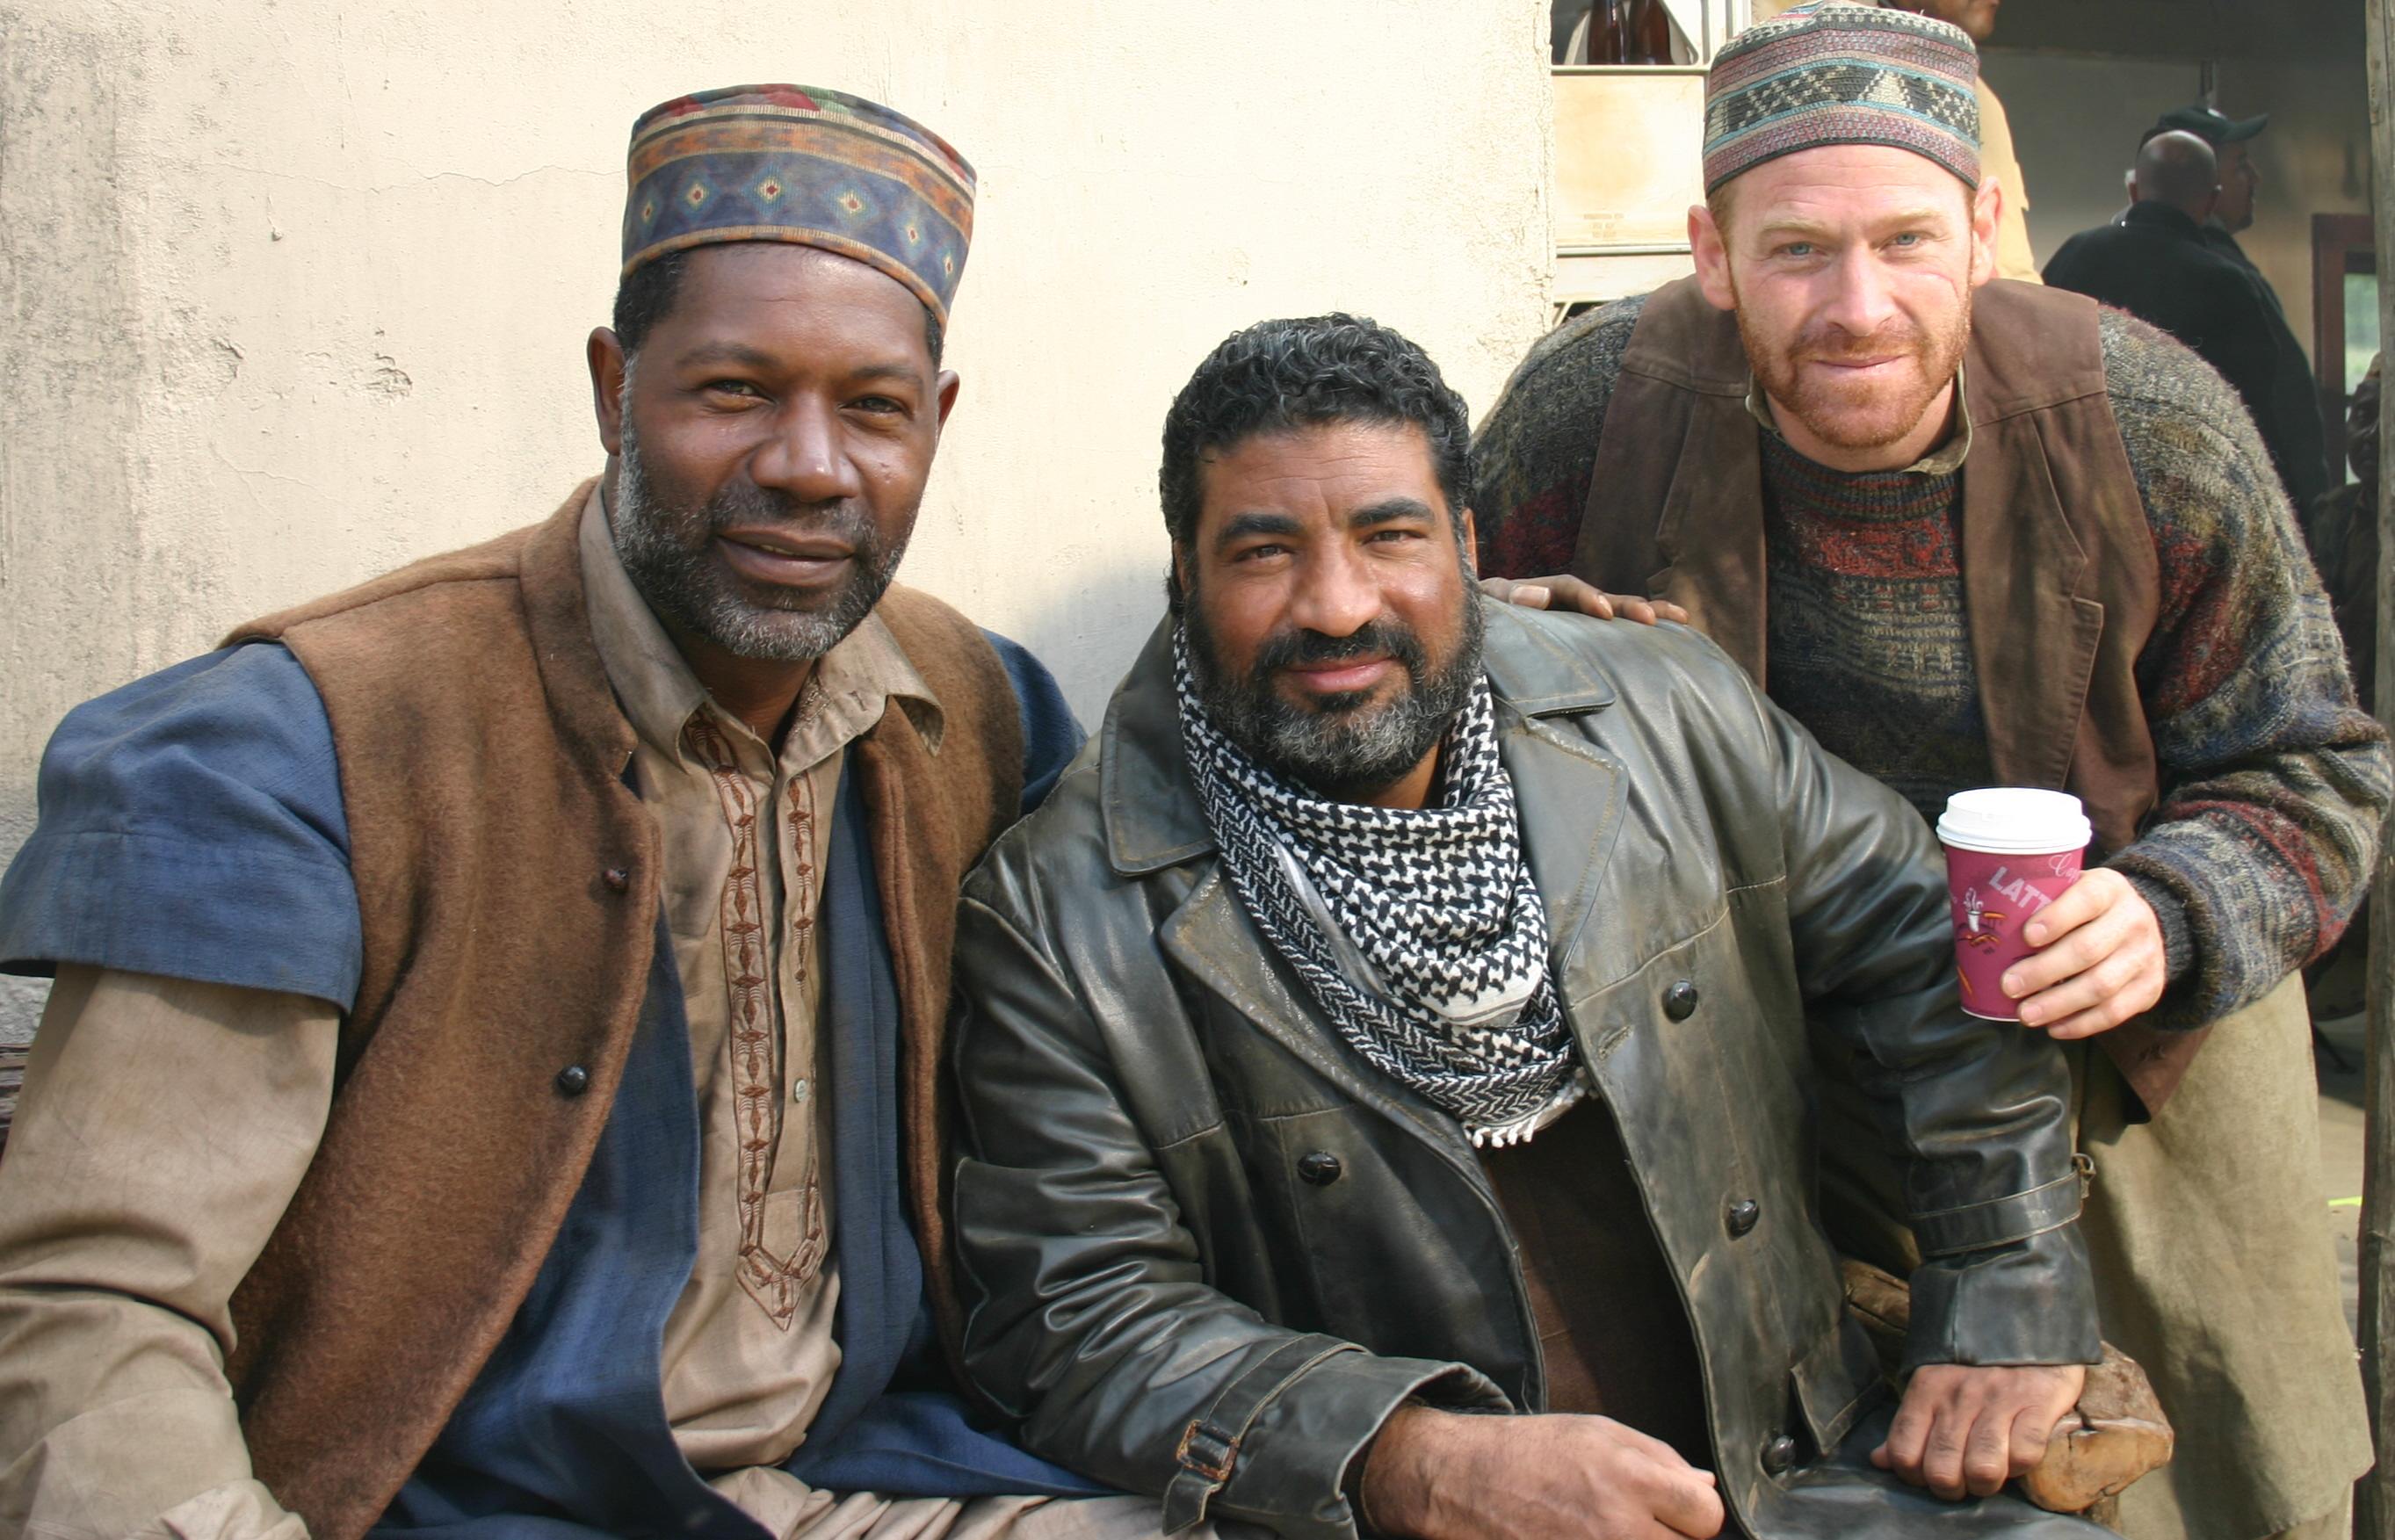 Sayed Badreya in the TV Show The Unit, with Dennis Haysbert - Max Martini